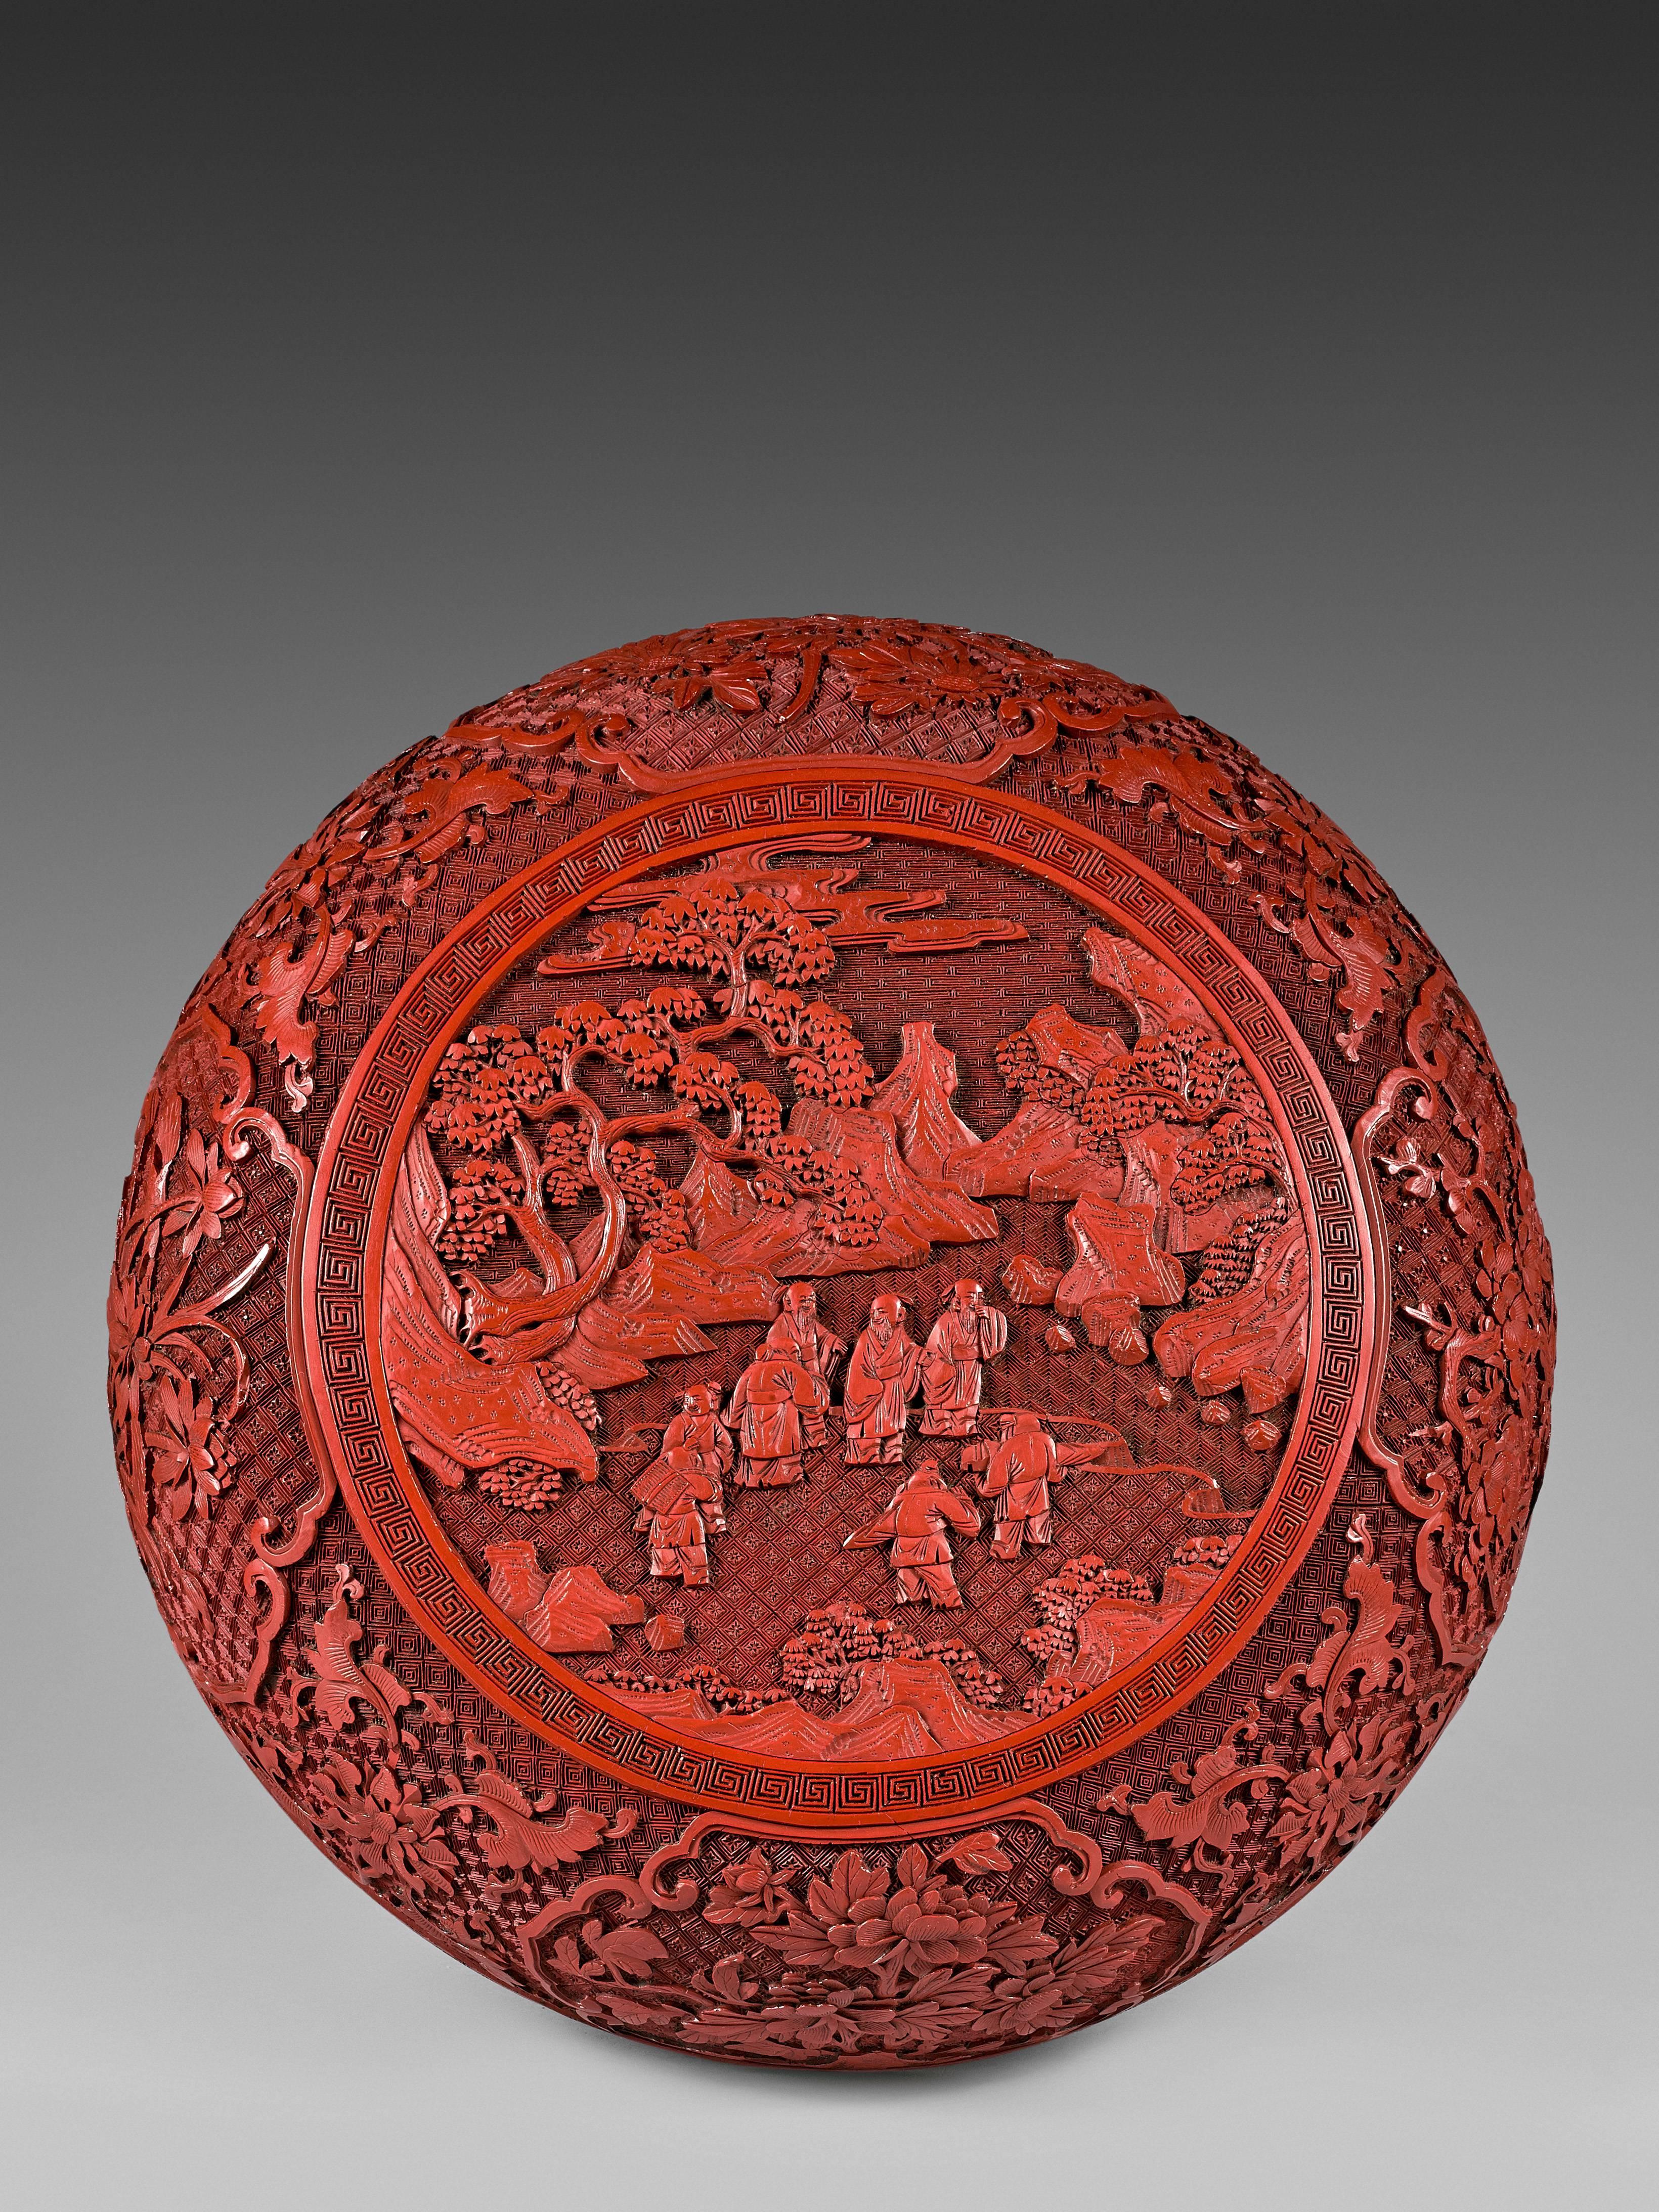 The round shape box resting on a small feet with keyfret pattern. The cover adorned with a round medallion depicting scholars and their servants in a rocky landscape. The sides of the box and cover with multilobed cartouches enclosing flowers of the